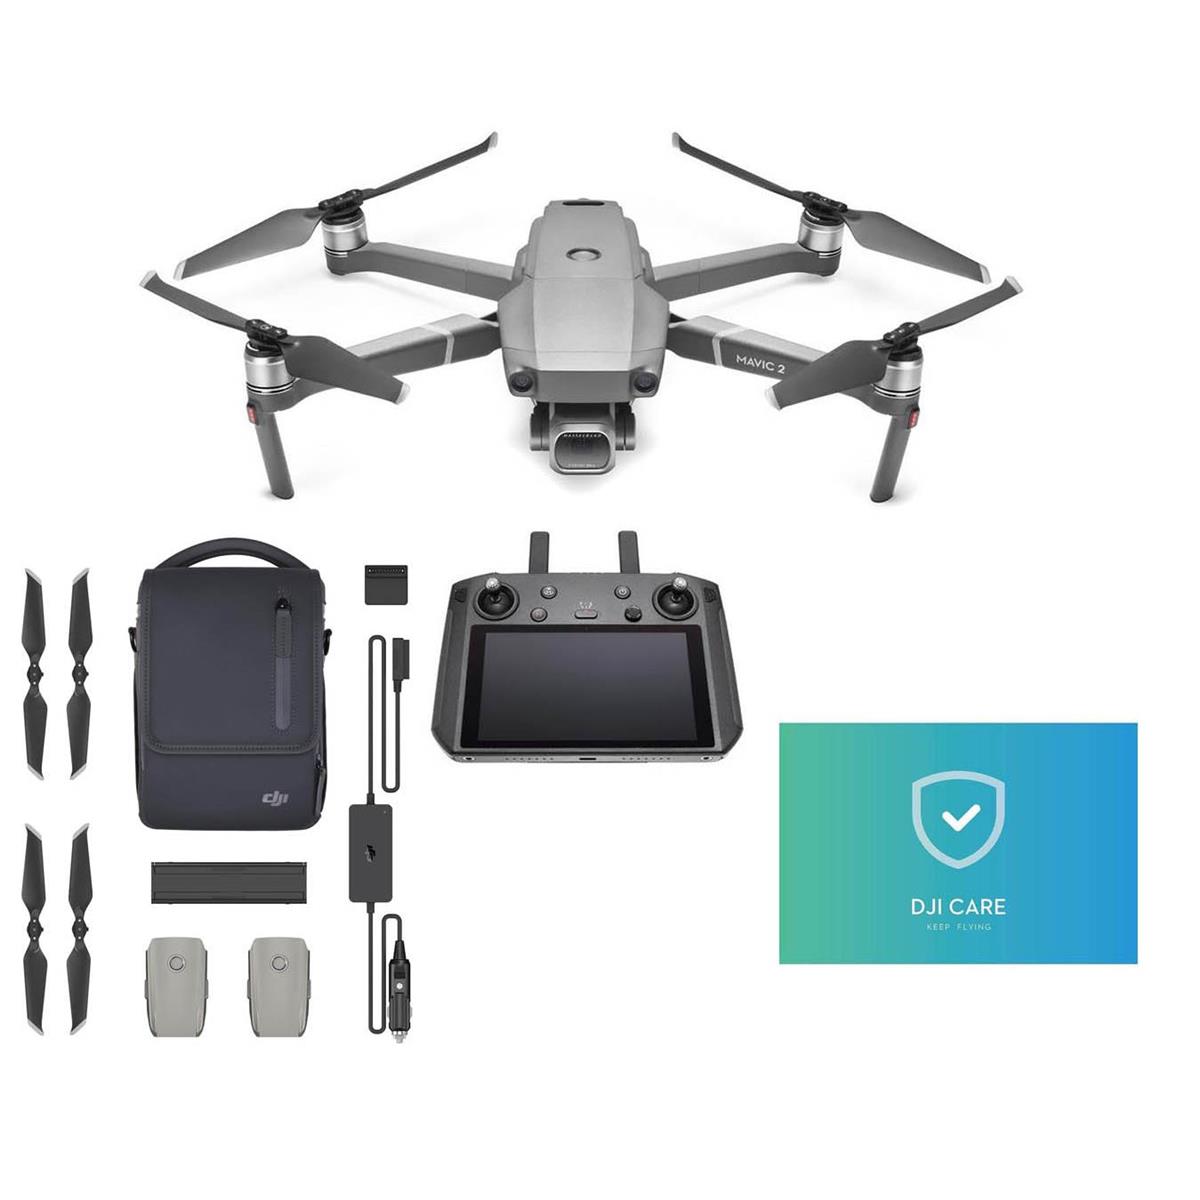 DJI Mavic 2 Pro Drone with Smart Controller, Fly More Kit and Care Refresh -  CP.MA.00000021.01 C